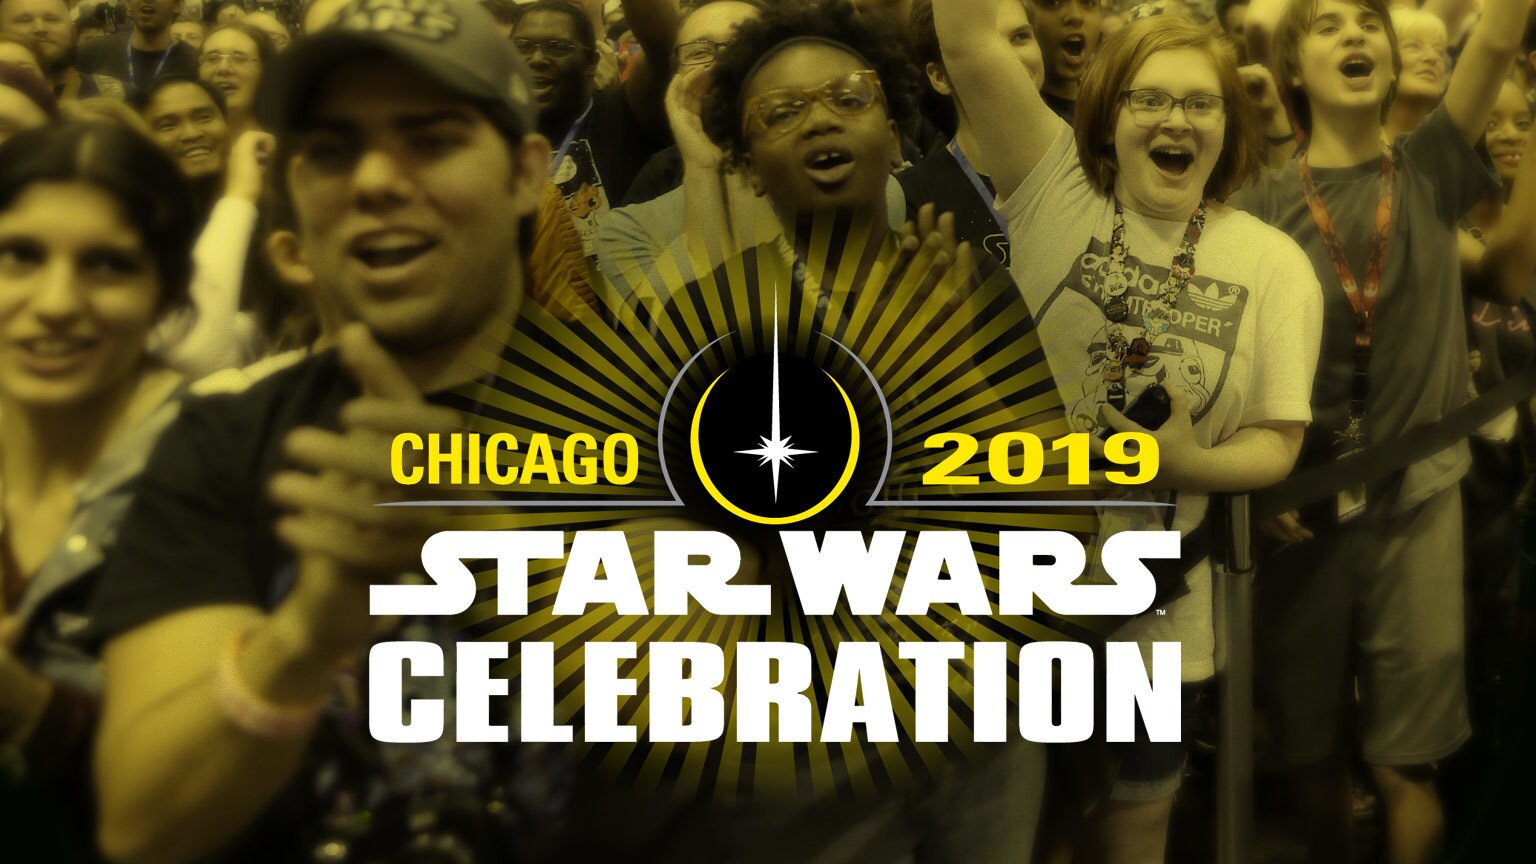 Star Wars Celebration is Heading to Chicago and The Star Wars Show has the Details